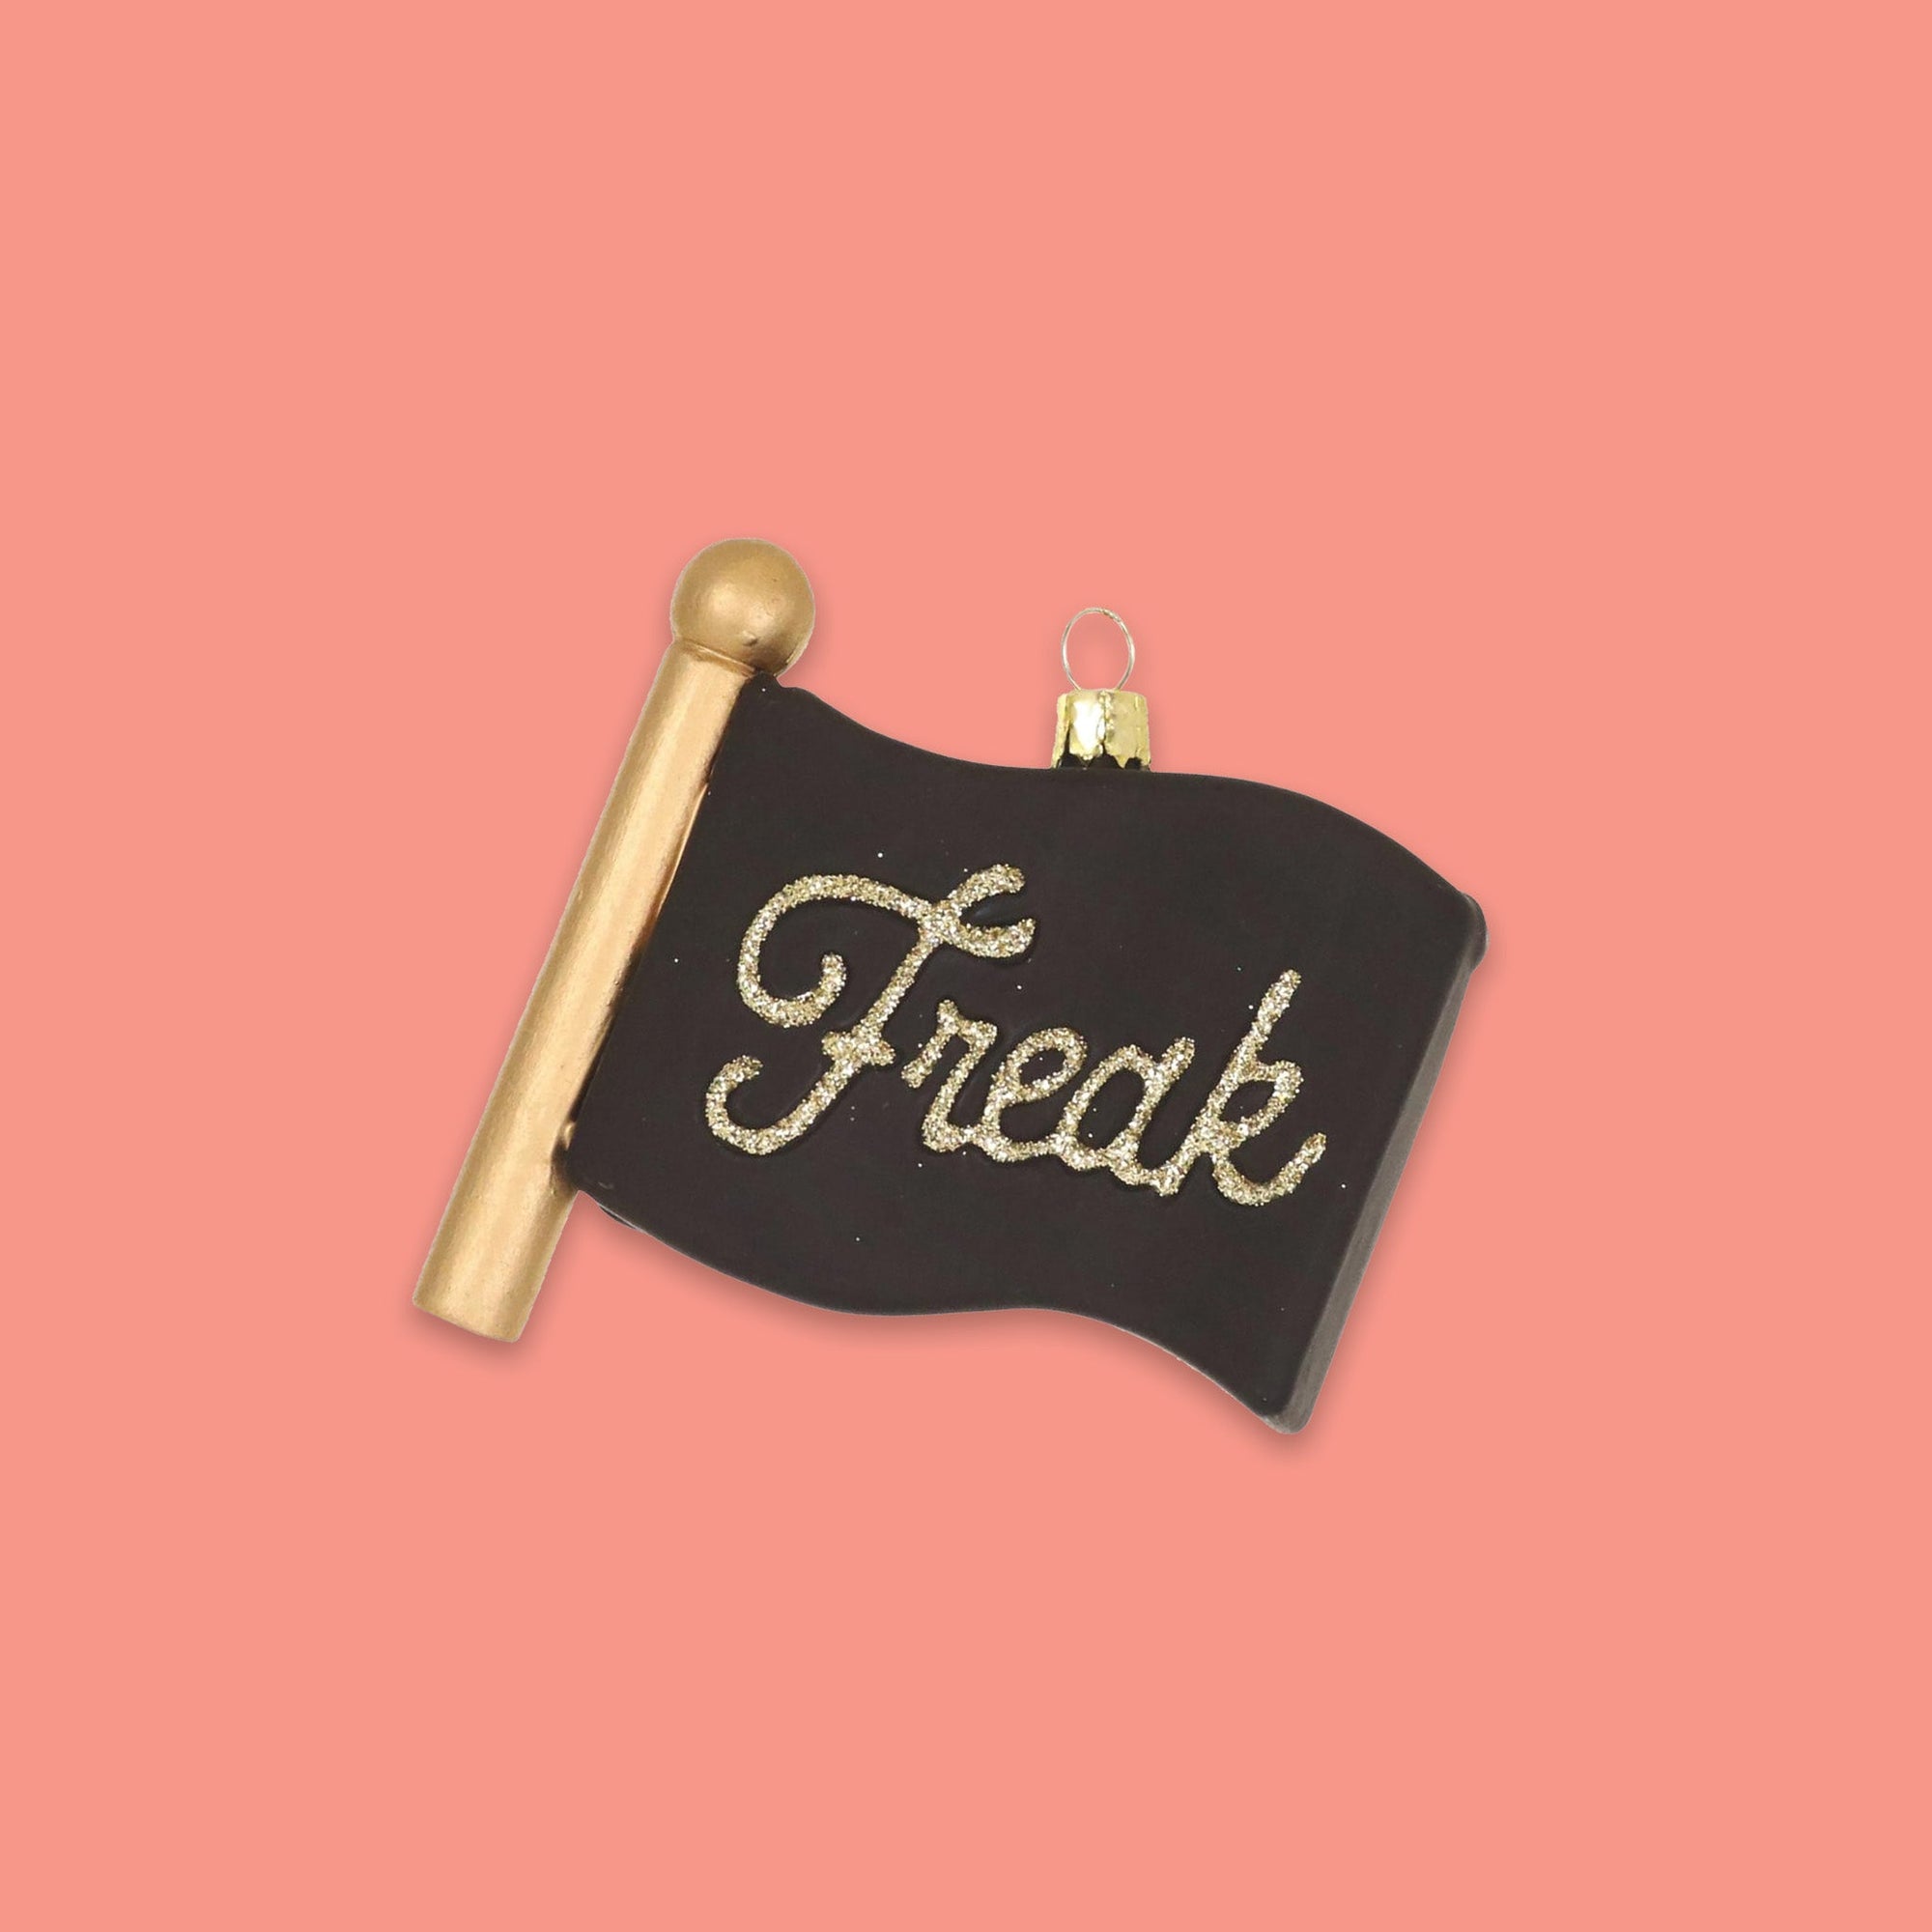 On a coral pink background sits a flag ornament. This black flag and gold pole glass ornament says "Freak" in glitter gold script lettering.